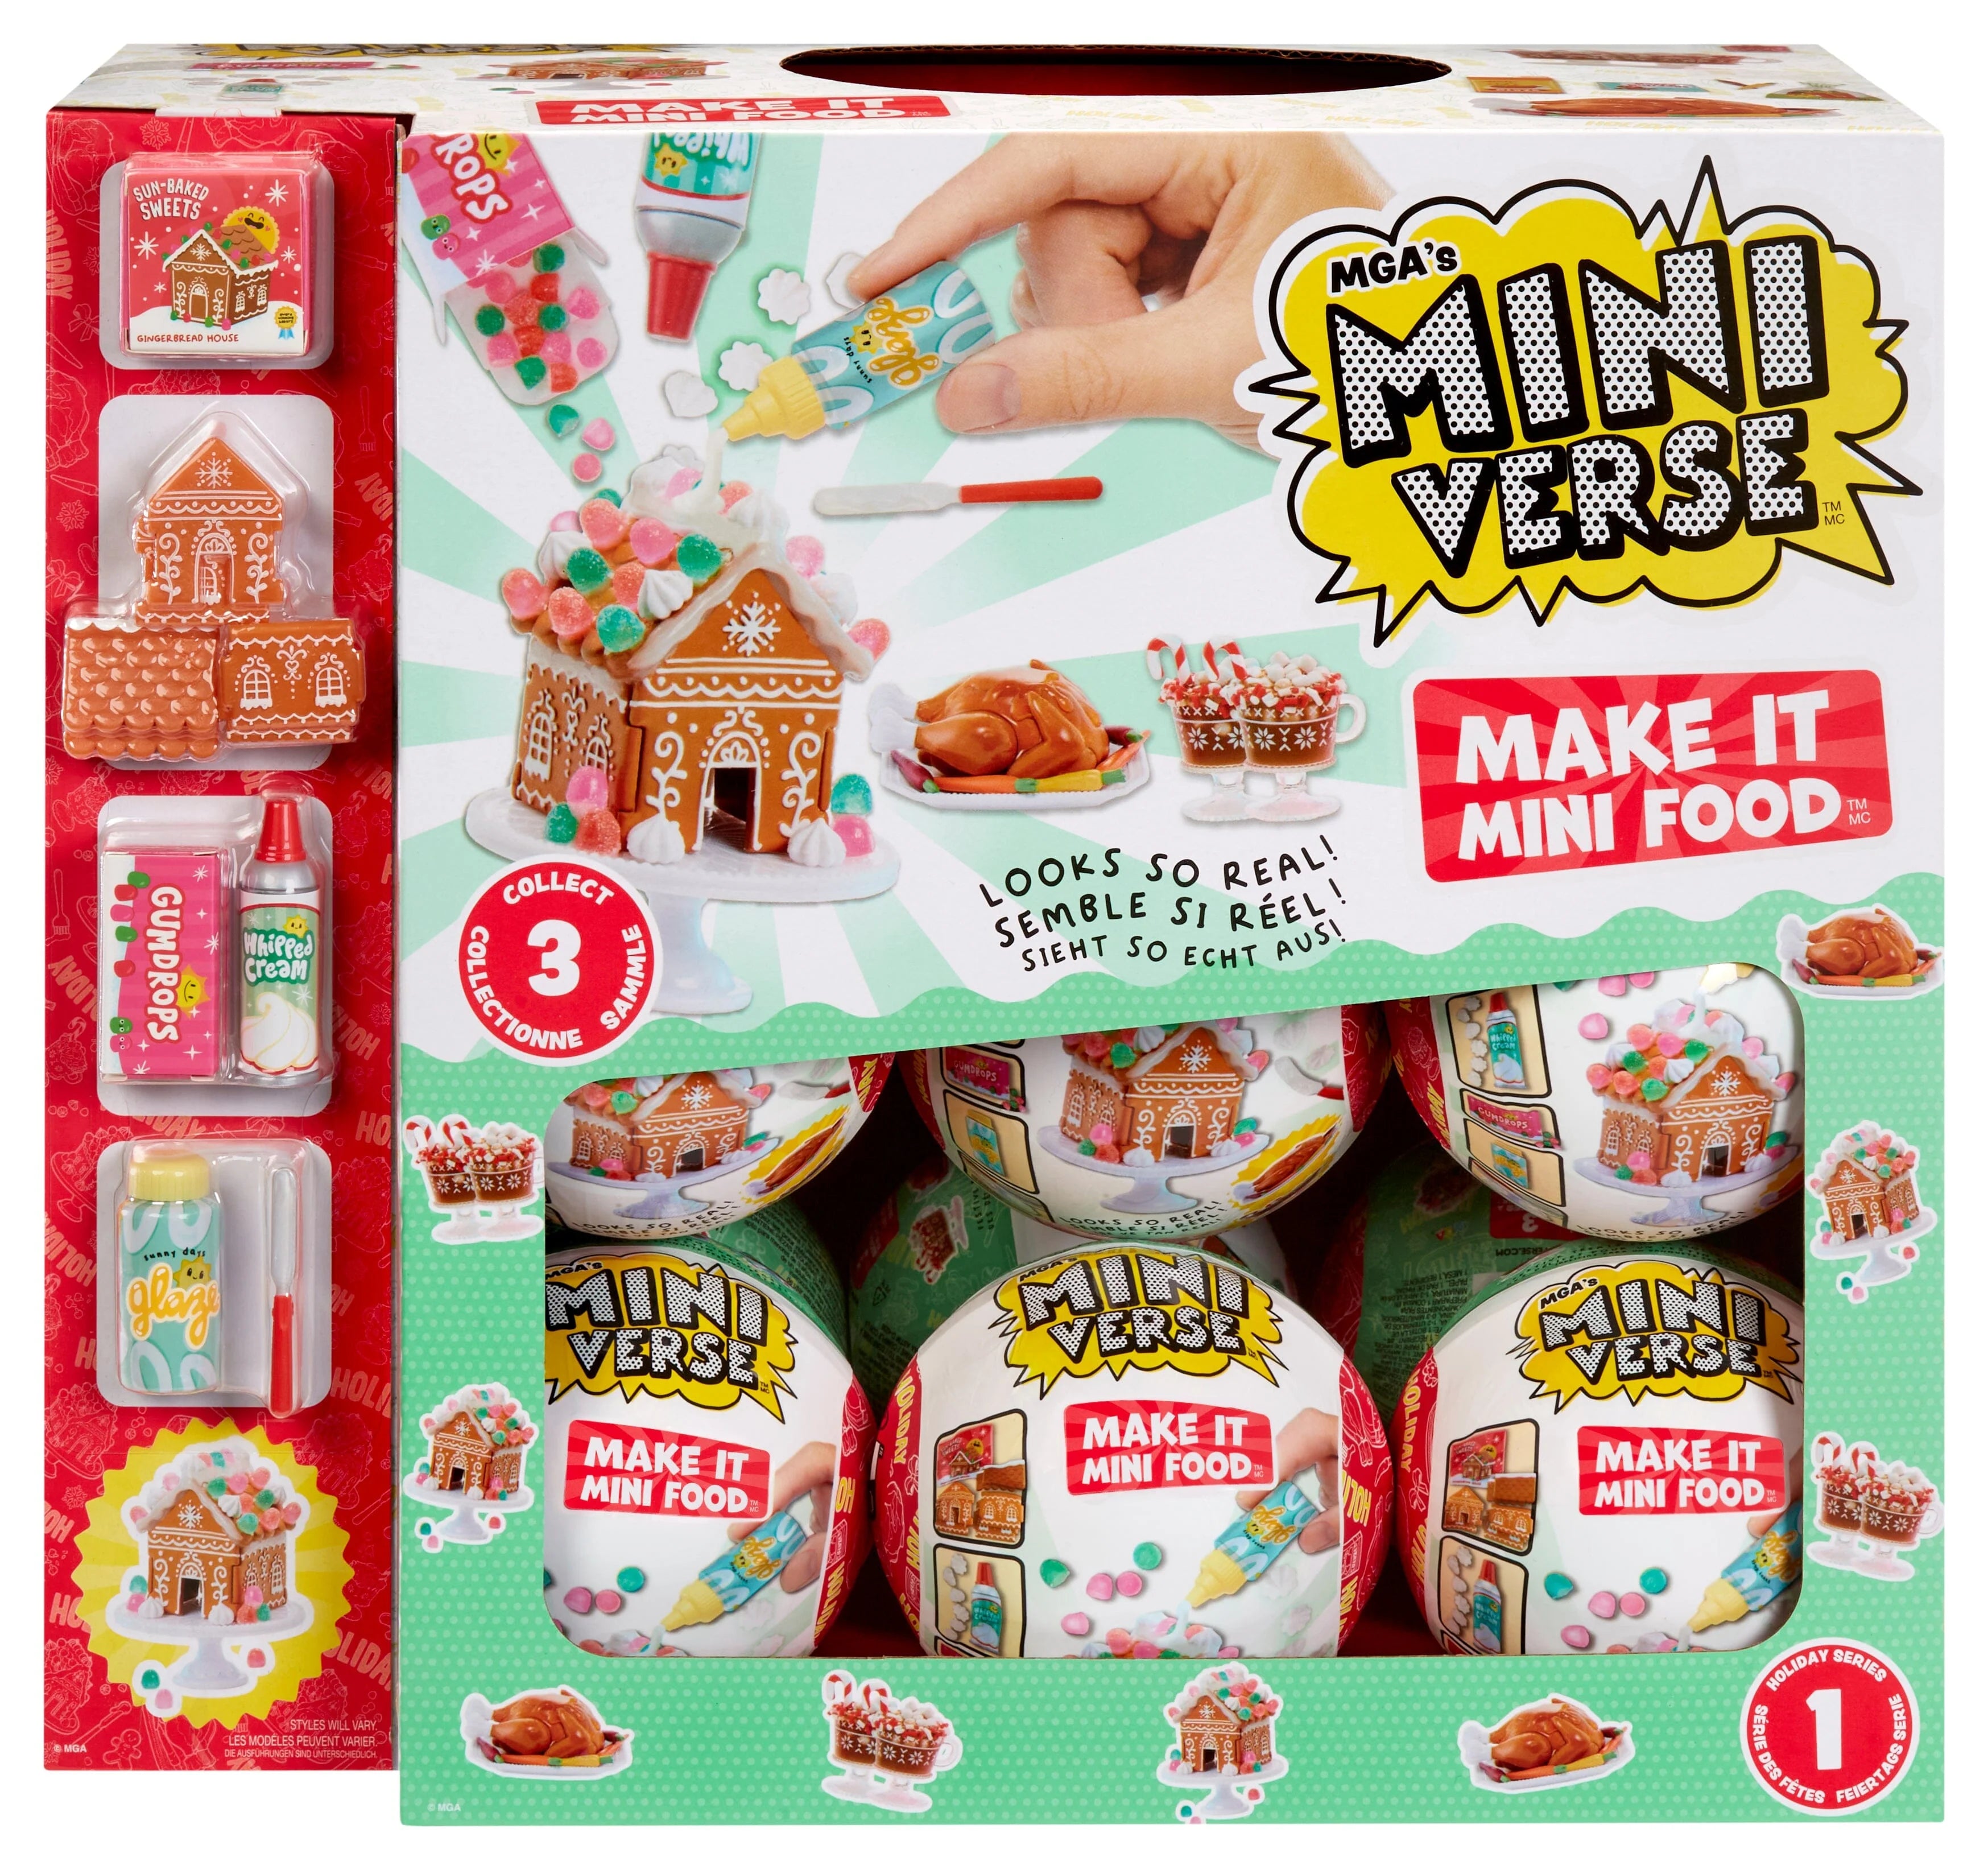 Miniverse - Make it Mini Diner - Holiday – Gingerbread House Toys